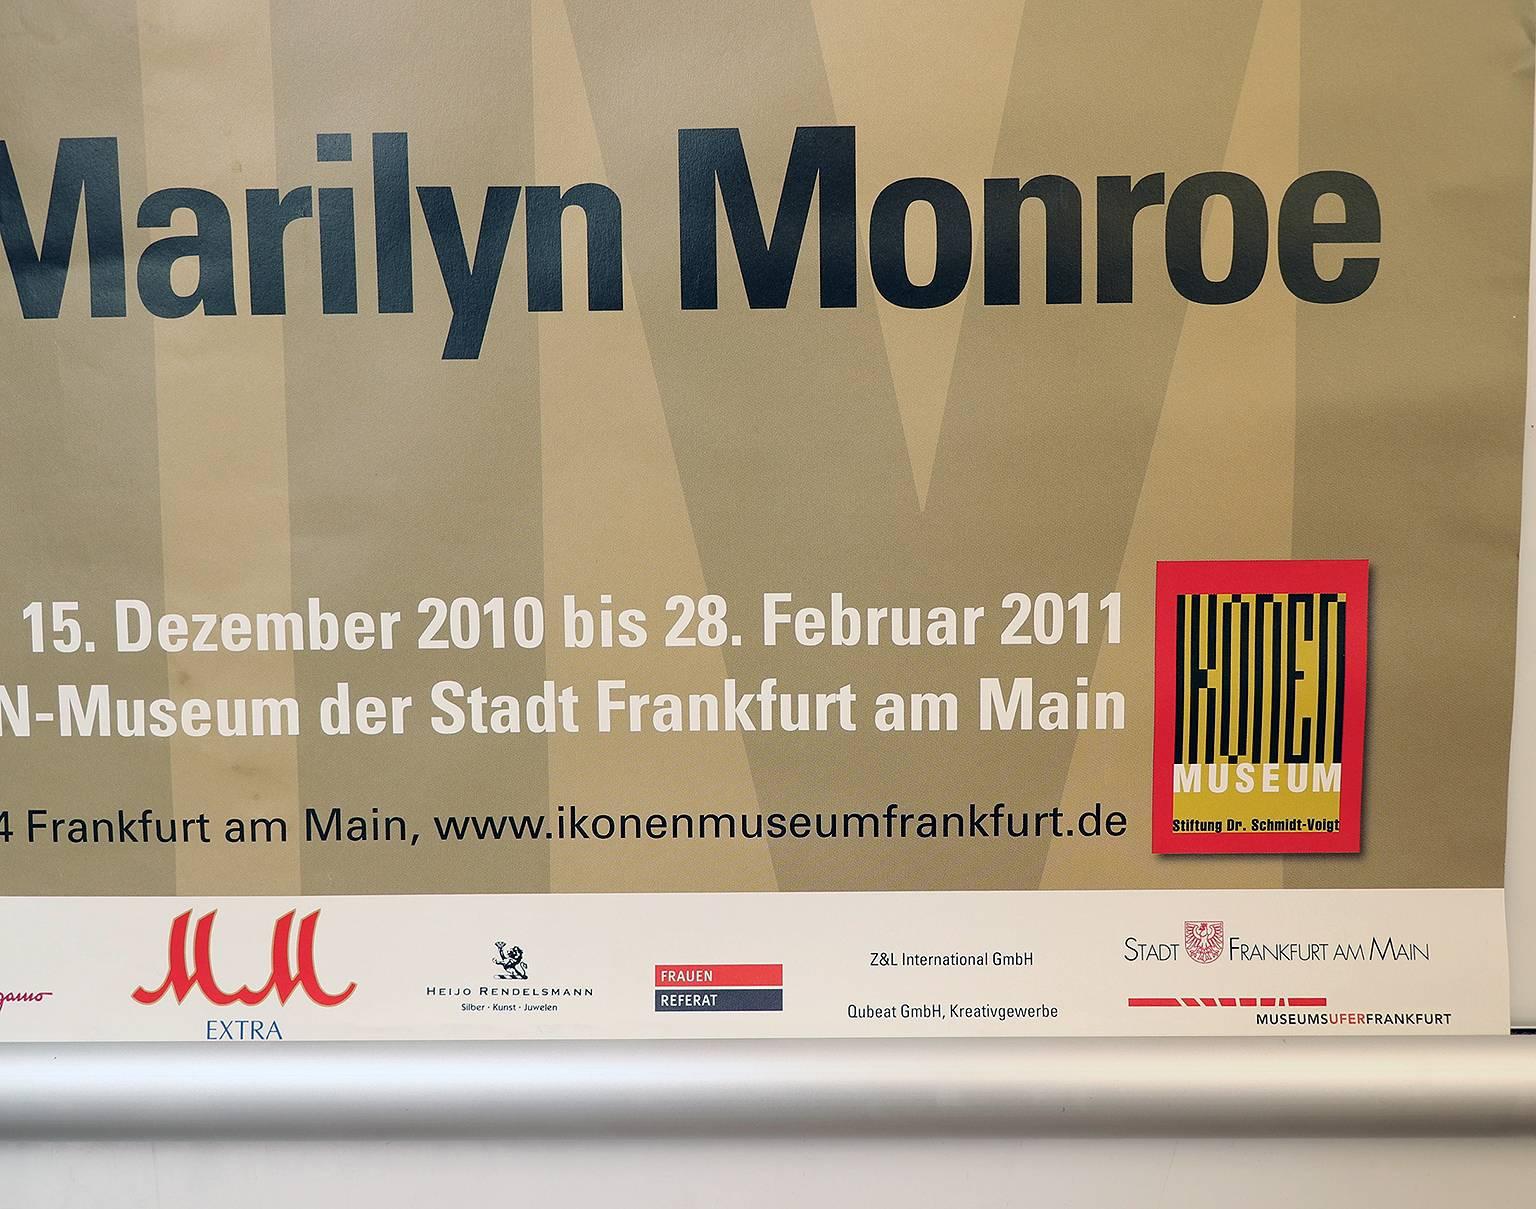 Marilyn Monroe, German exhibition poster Frankfurt, 2010-2011.
Not framed, has not been folded, rolled up.
Size diameter A1: 594 x 841 mm. 